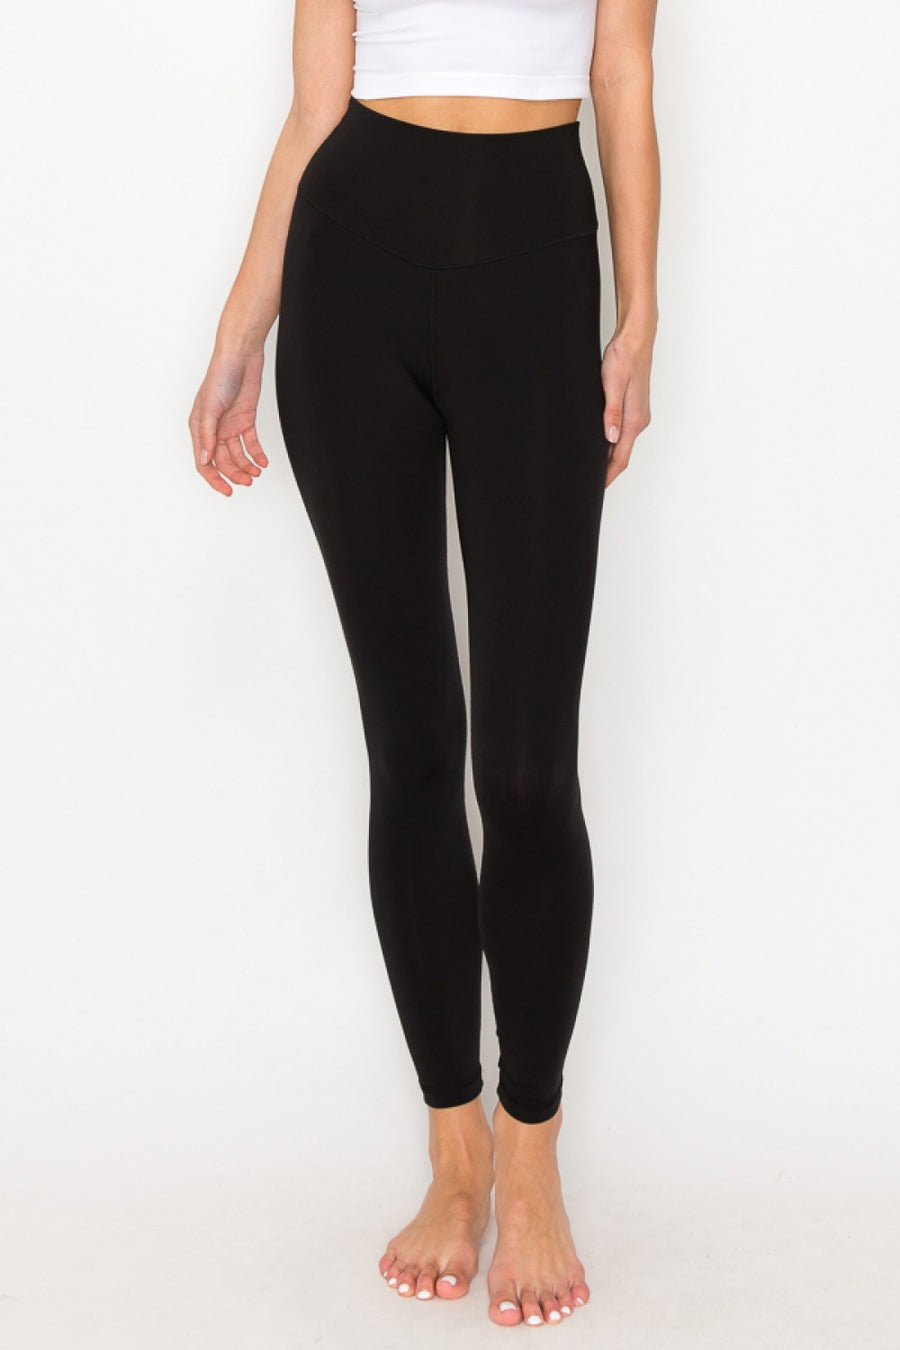 Featuring a full length high waisted legging in the colors black and ash 